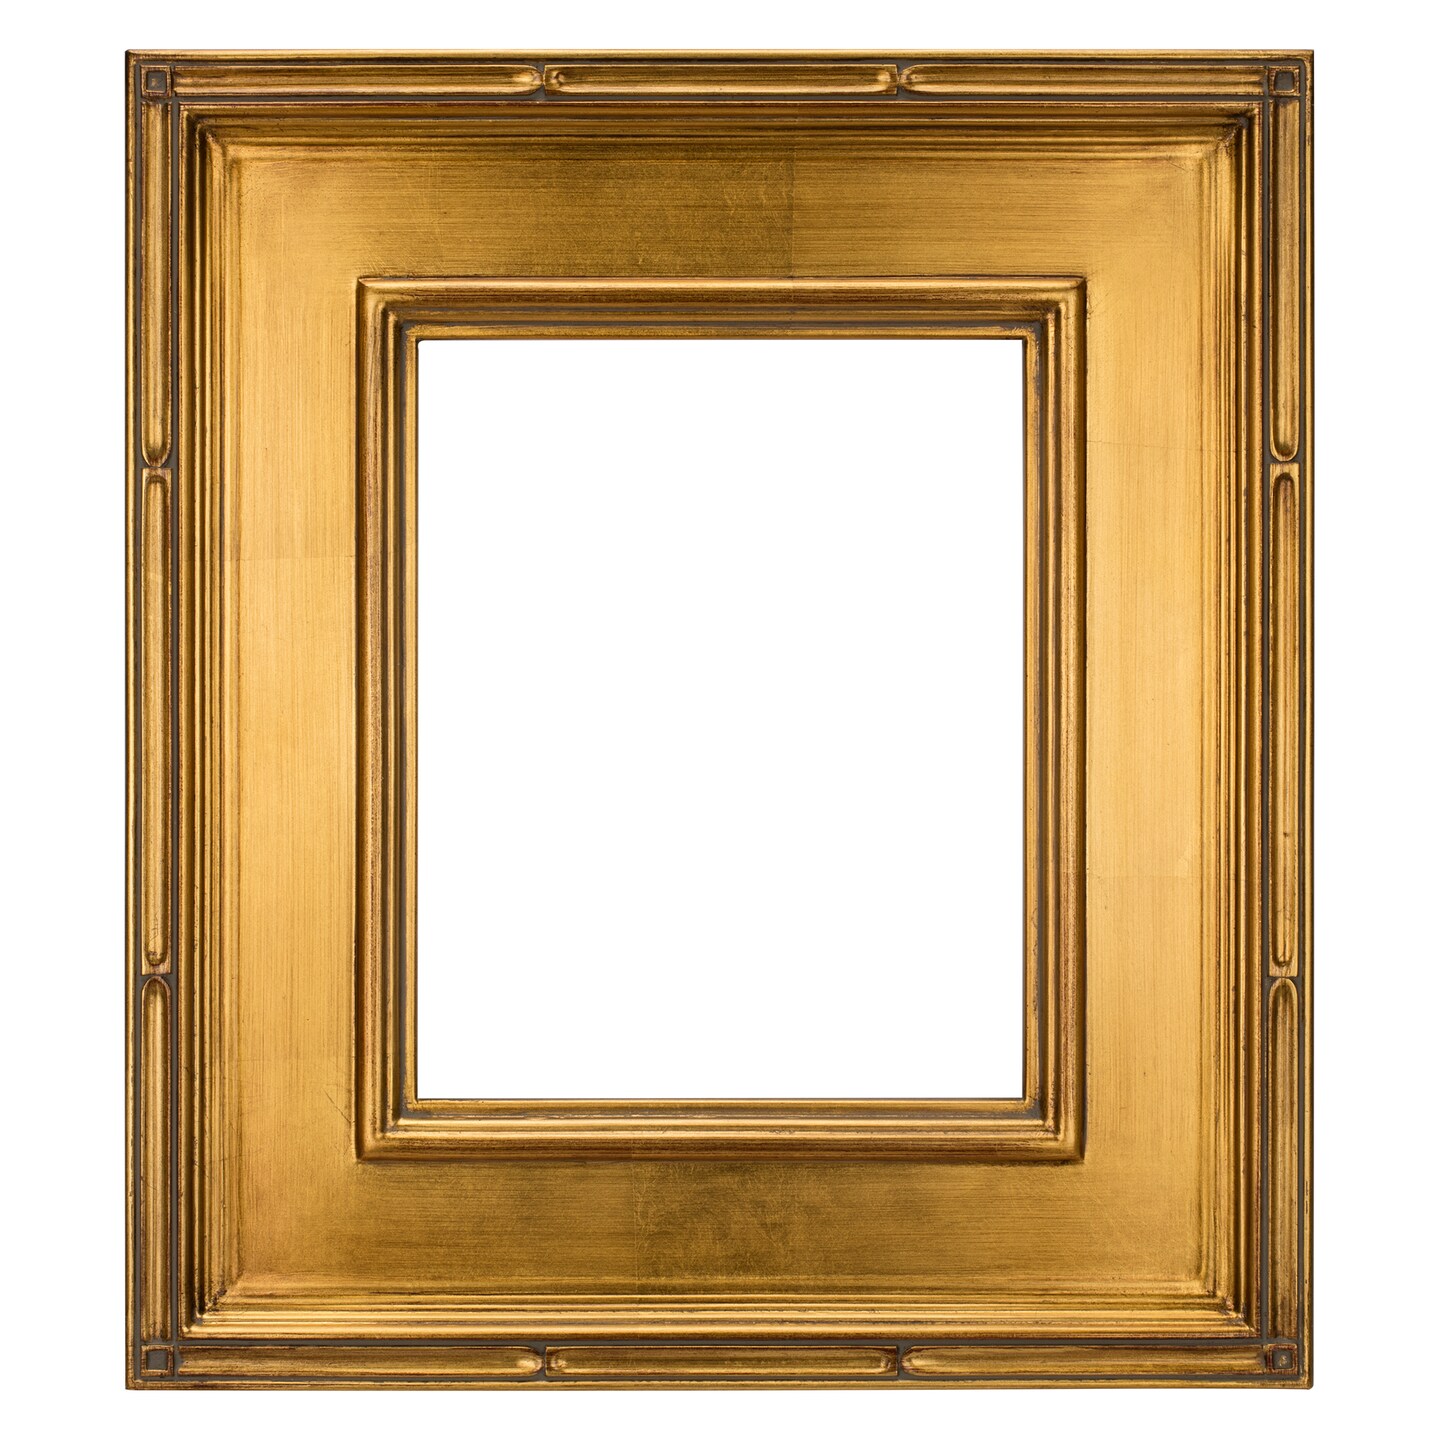 Creative Mark Museum Plein Aire Wooden Art Picture Frame -  Gold - 3.5-Inch-Wide Frames - Museum Quality Closed Corner Photo Frames - No Glass or Backing